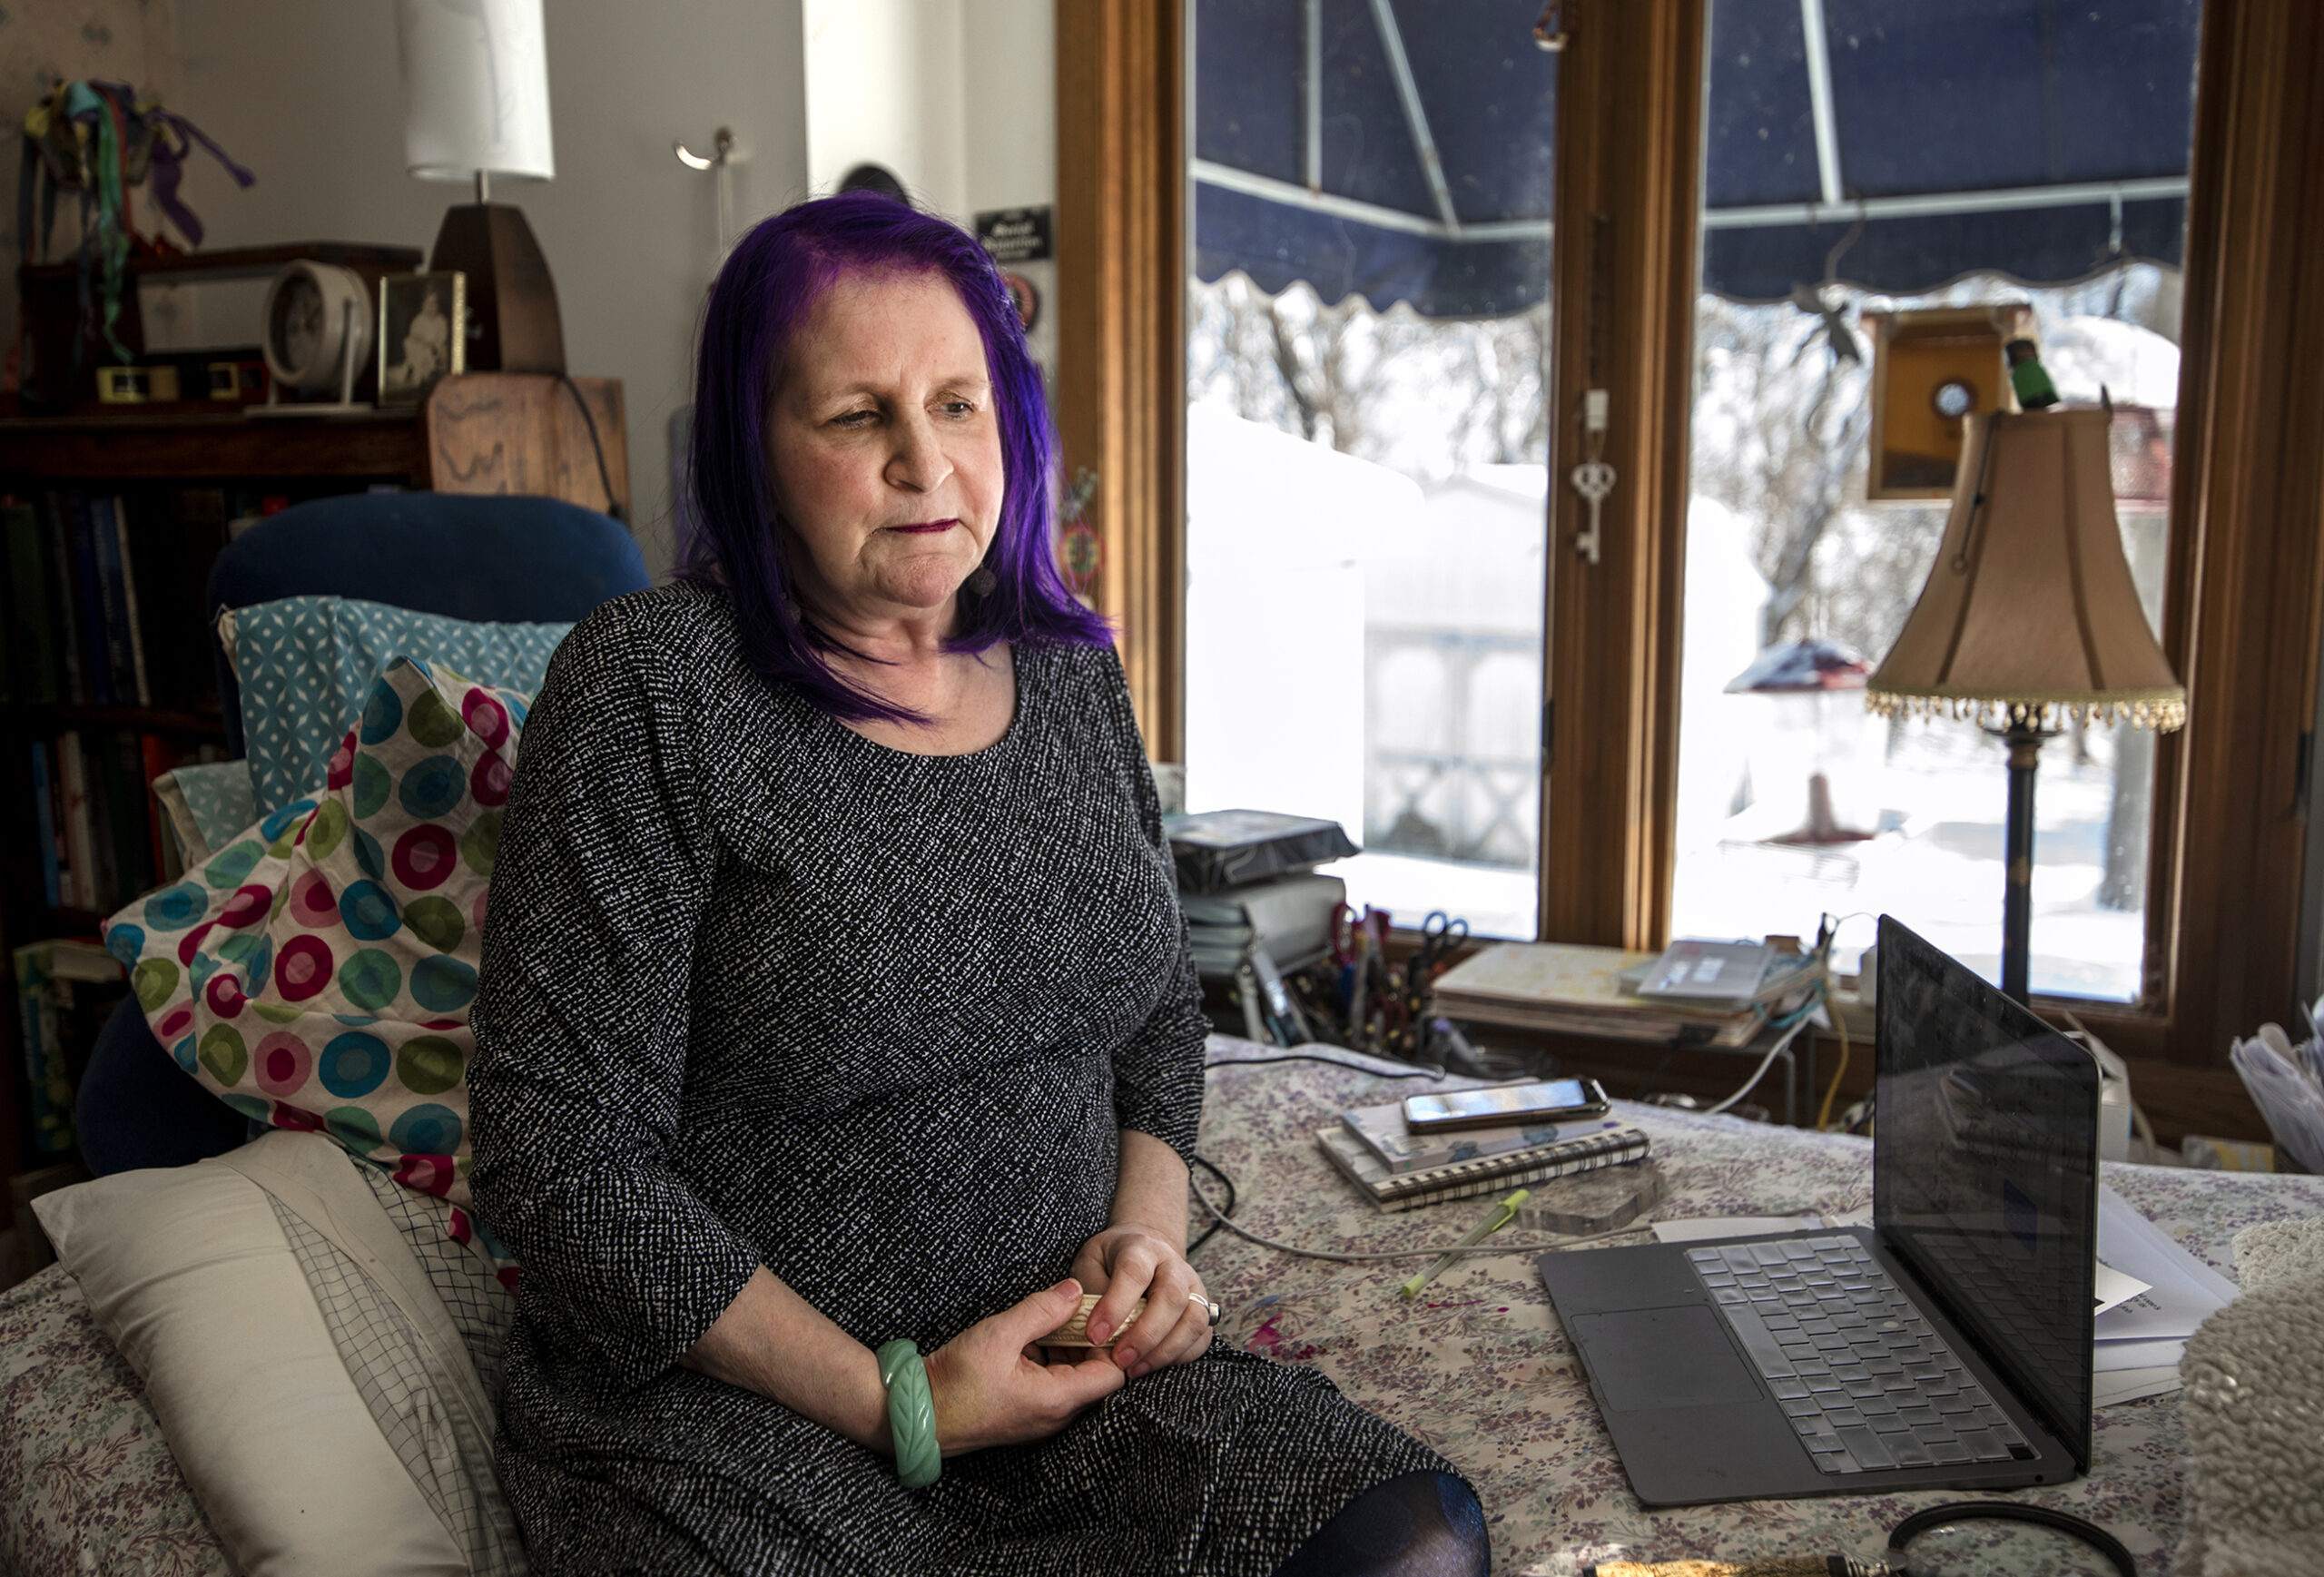 Sheryl Lamoureux looks down as she sits on a bed situated near windows.